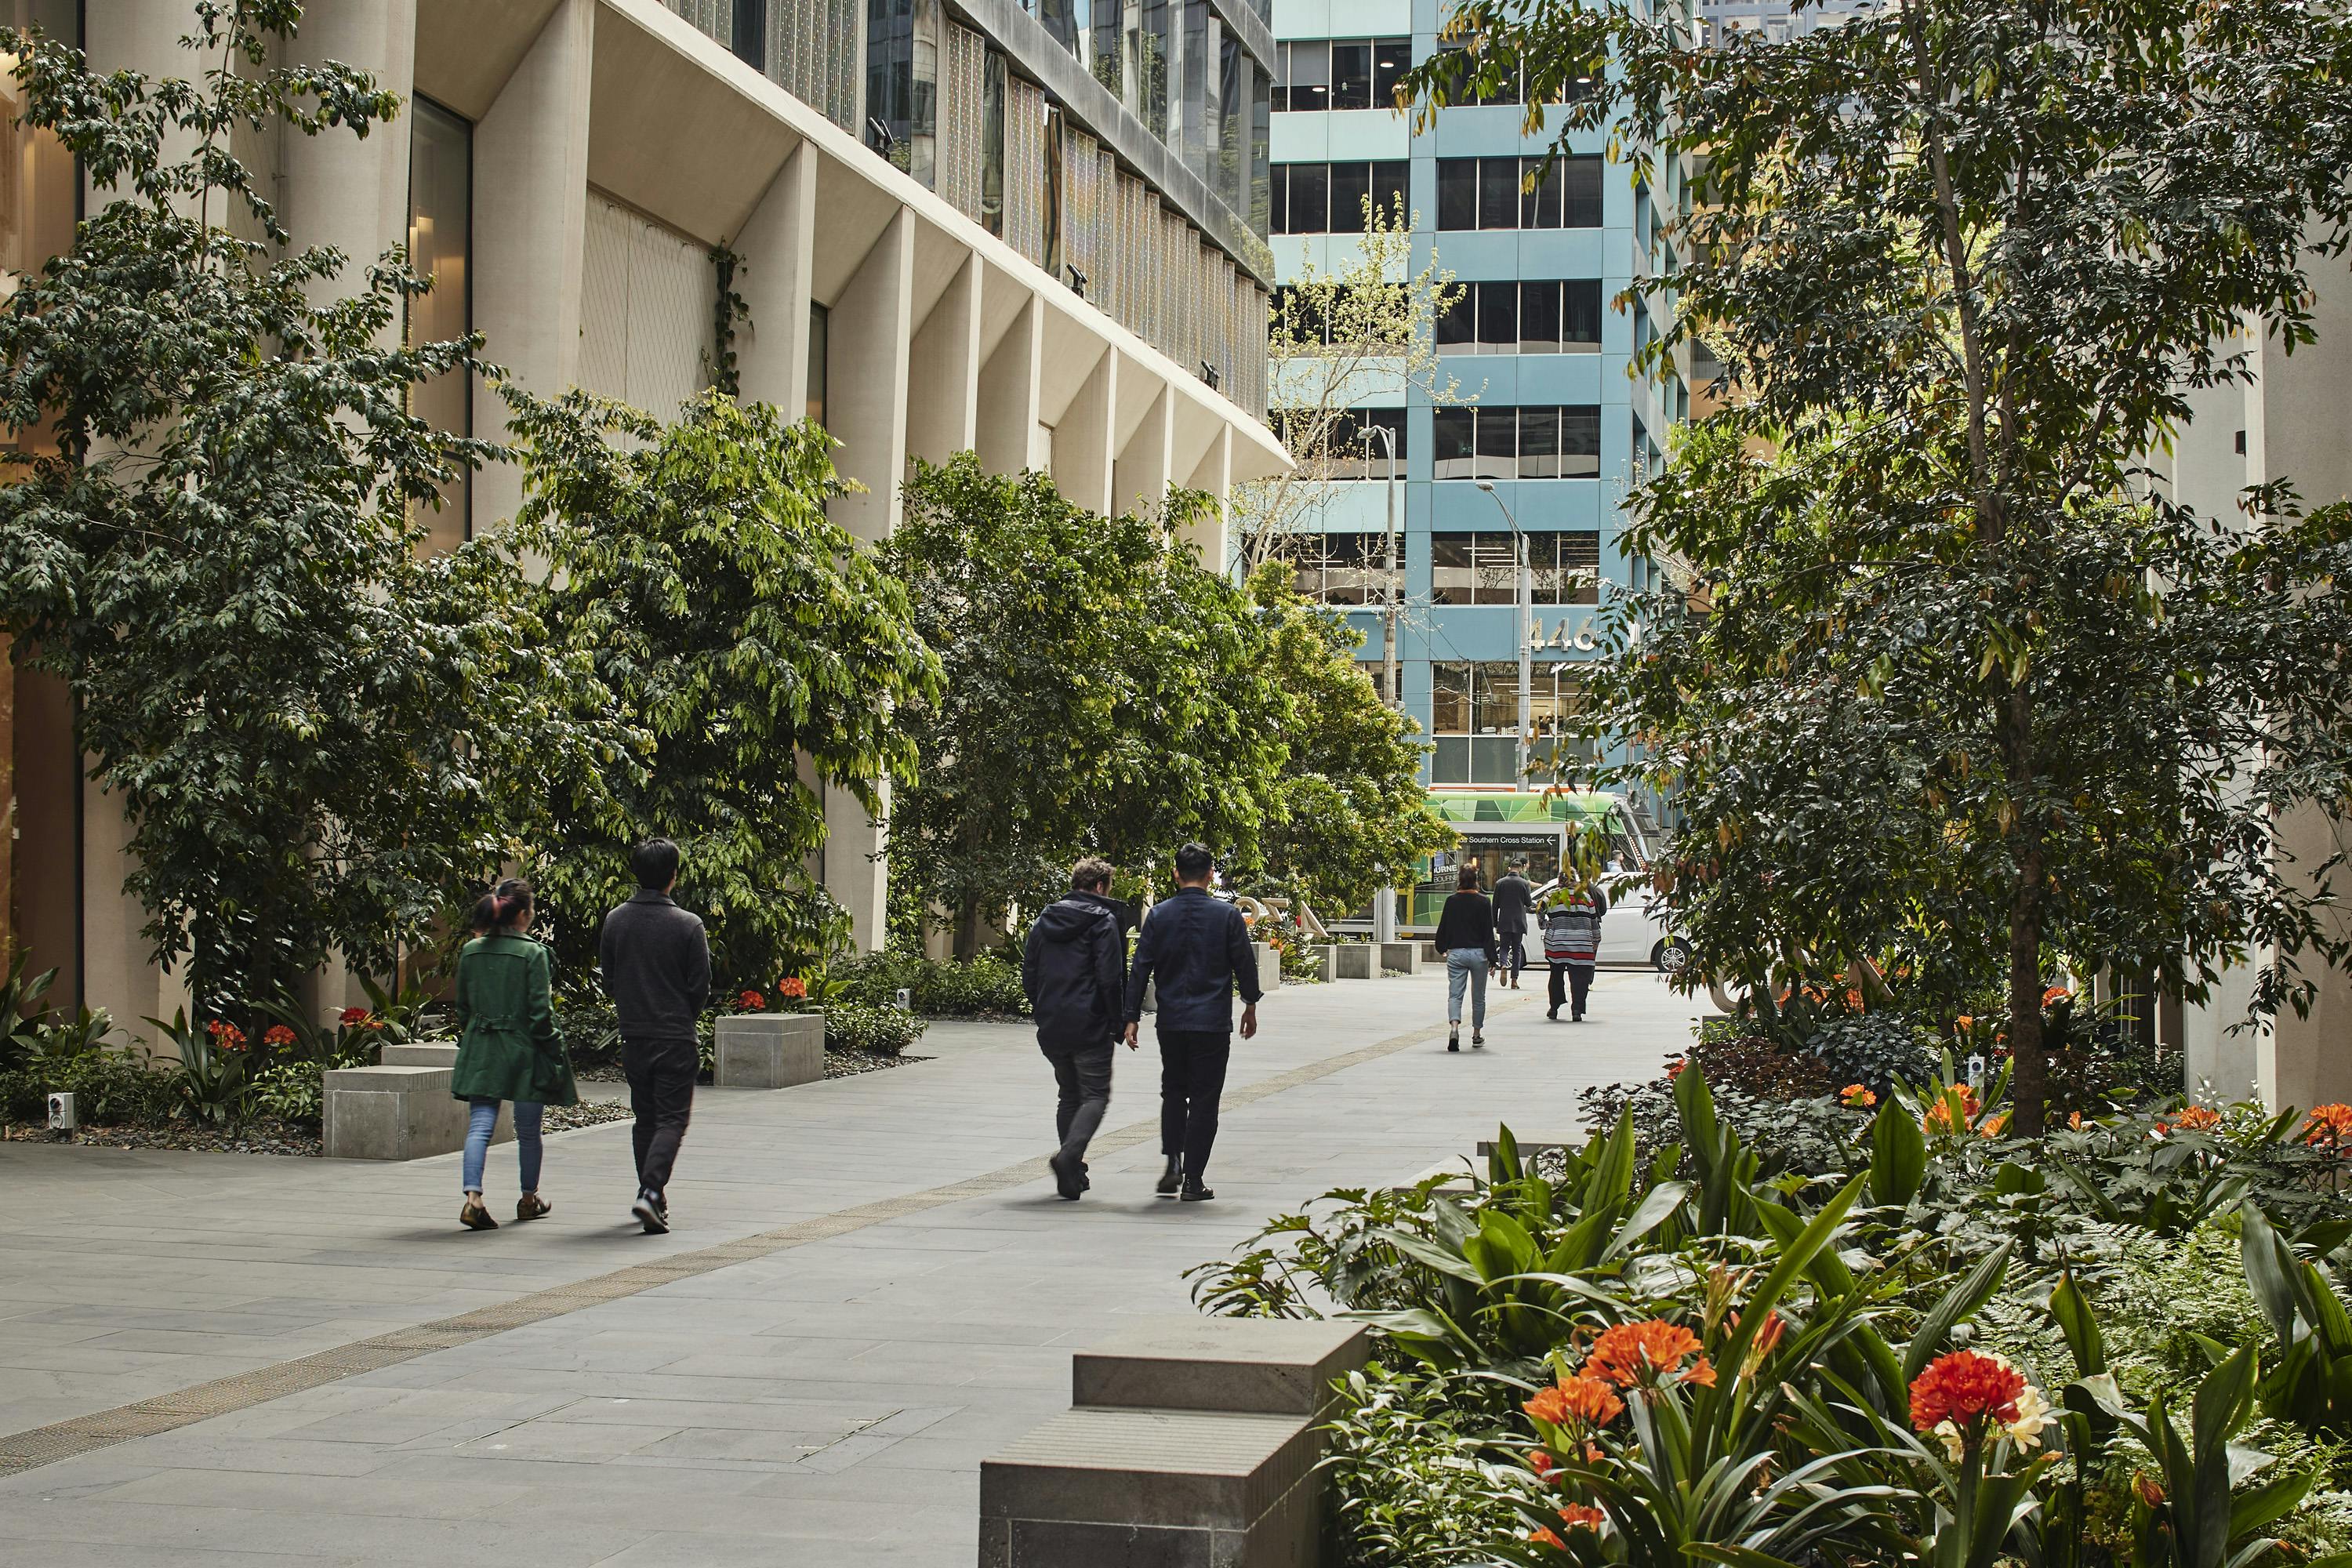 A photograph of a large urban building forecourt filled on two sides with lush planting, from ground cover, through to trees and climber. There are people walking away from the camera. There is a tram in the distance.